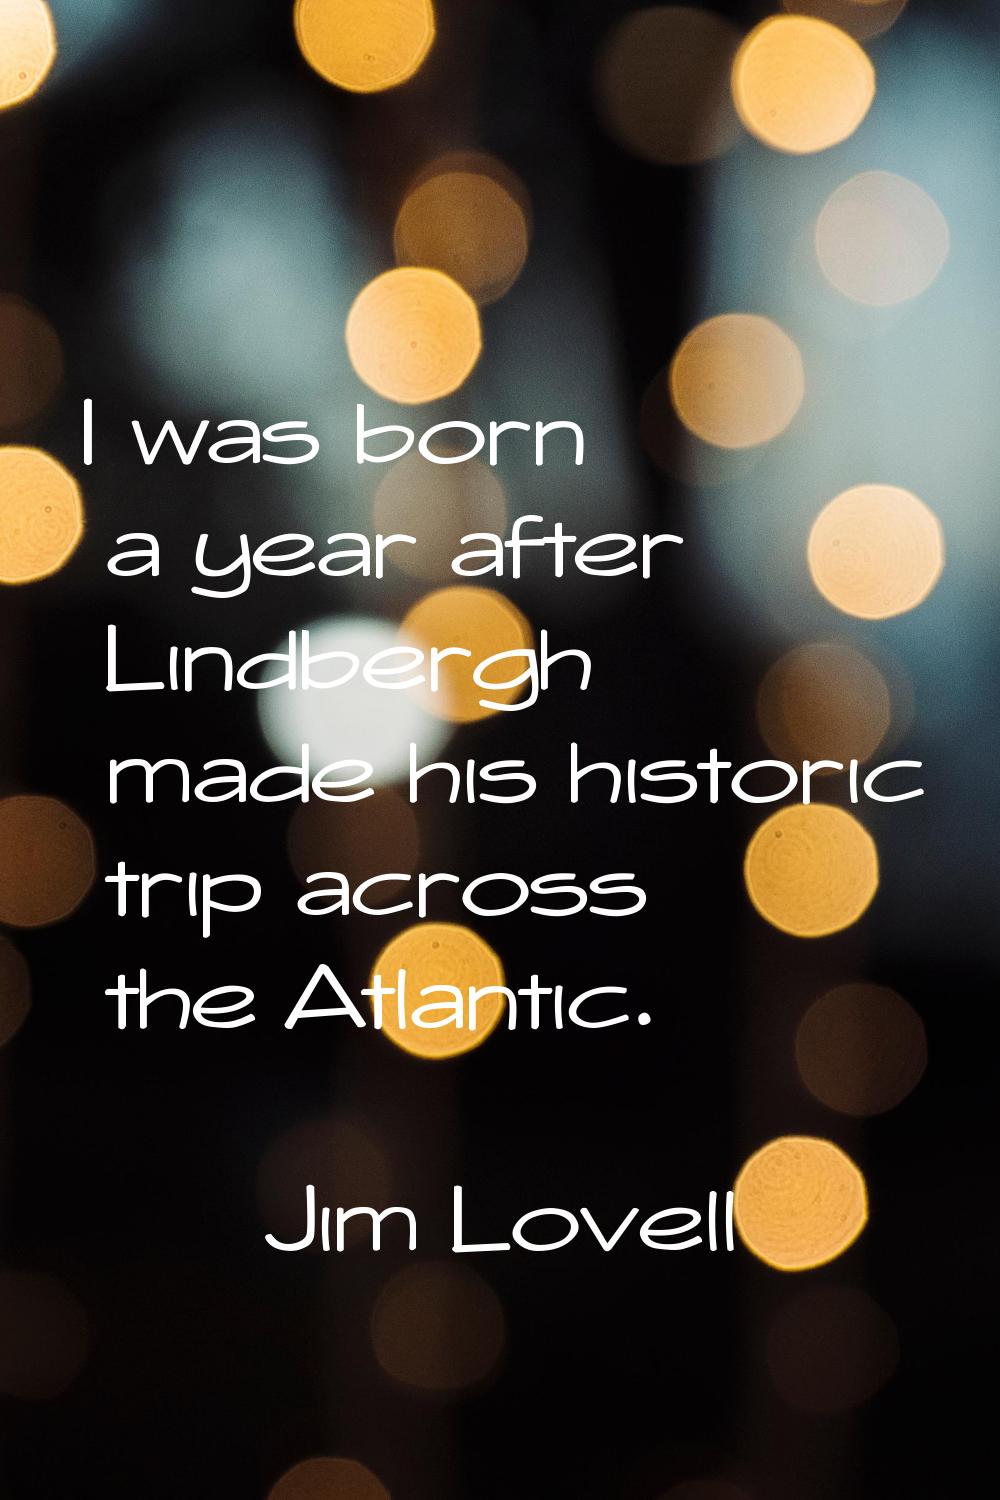 I was born a year after Lindbergh made his historic trip across the Atlantic.